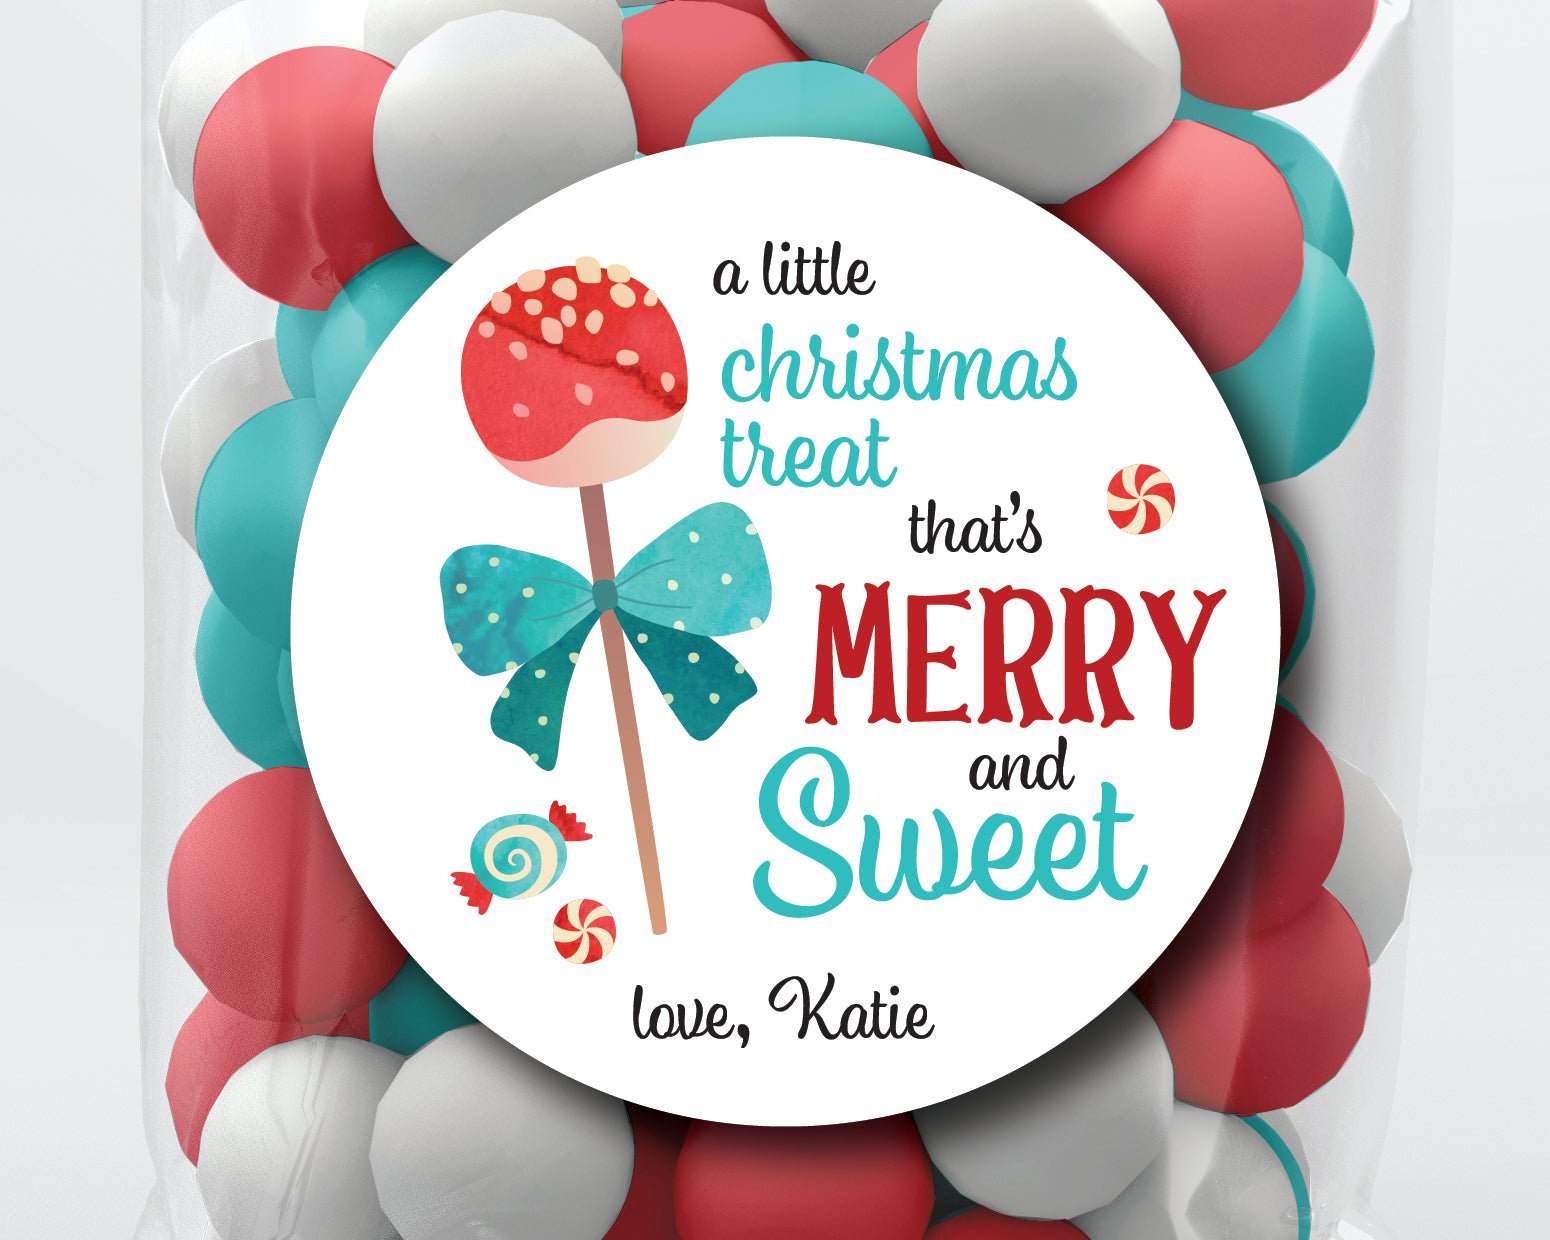 Merry & Sweet, Sweet Christmas Cake Pop Stickers or Tags . Christmas Gift  Labels